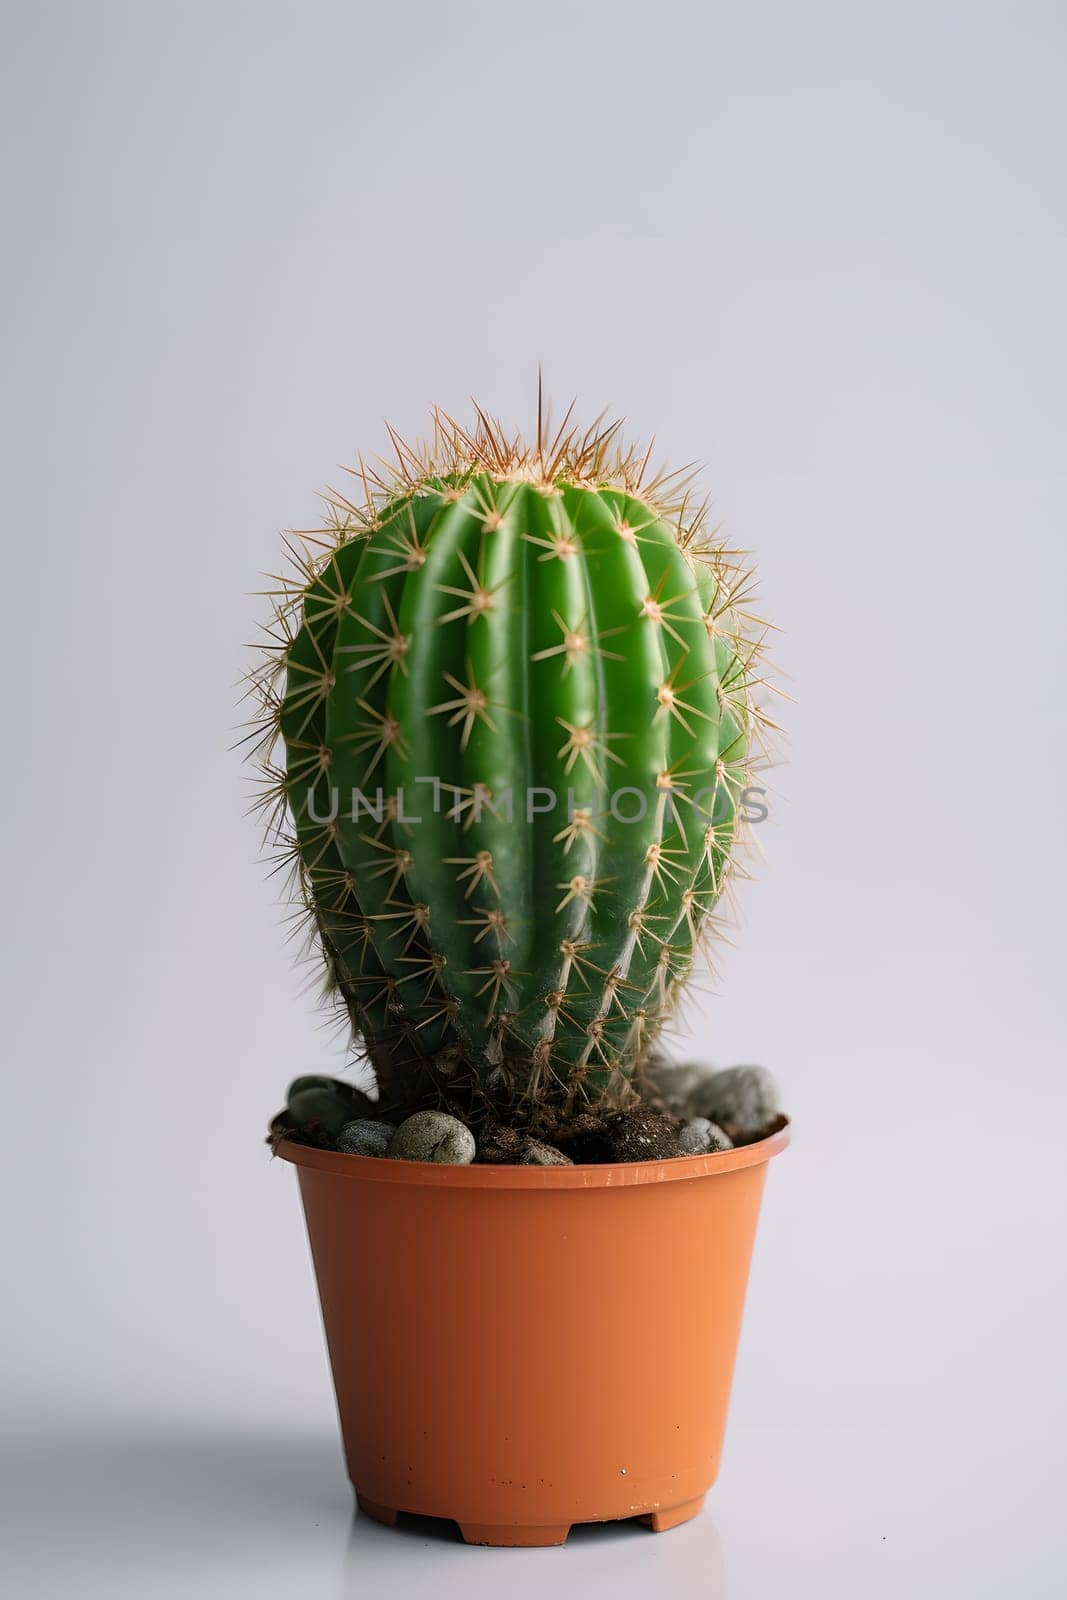 one round indoor plant cactus in pot on white background. Neural network generated in May 2023. Not based on any actual object, scene or pattern.